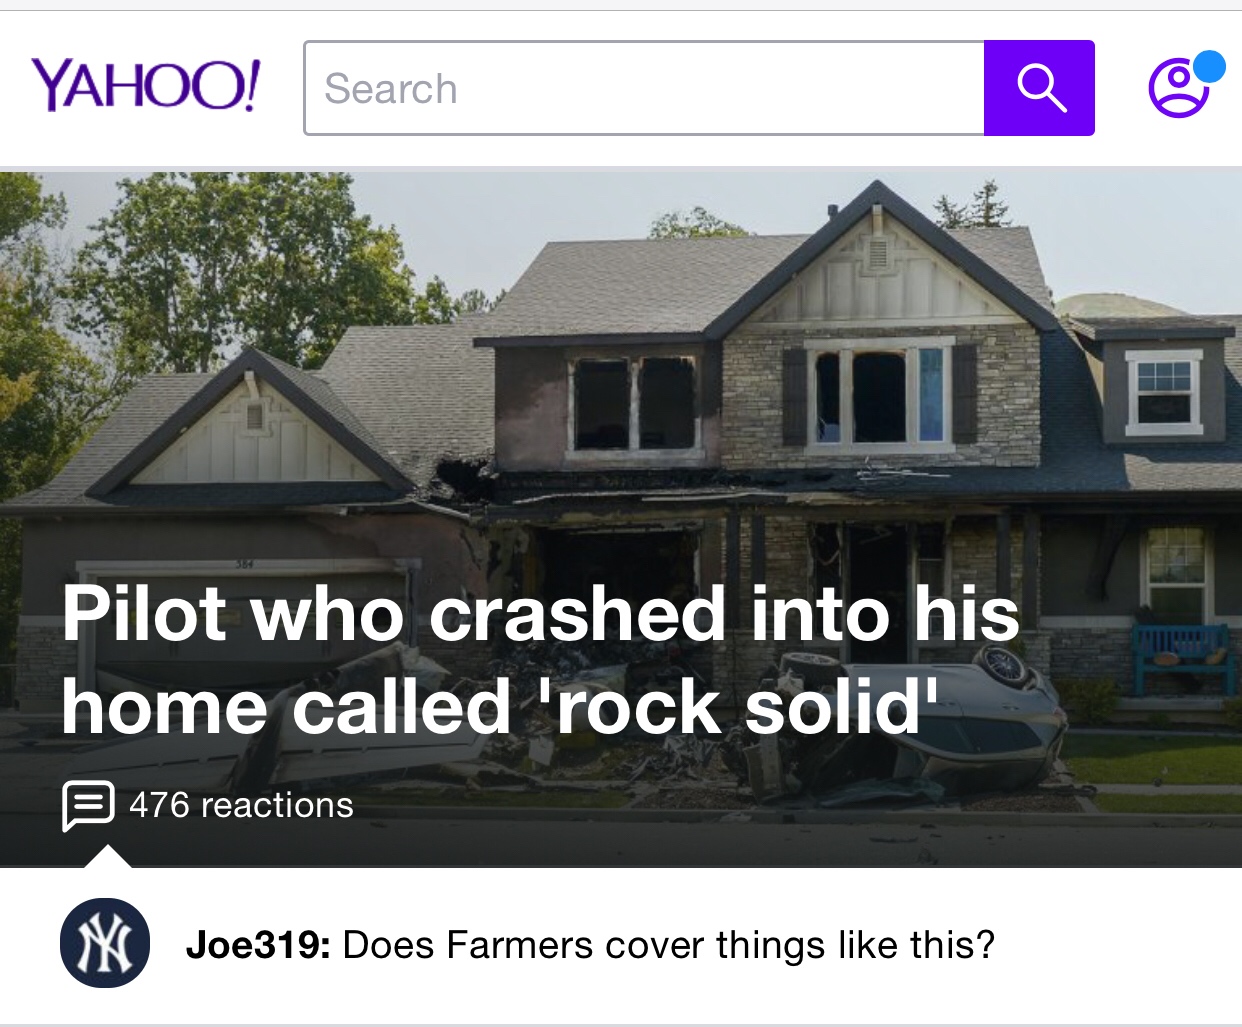 Yahoo Discovers Their Newest Feature May Not Have Been Fully Thought Out...